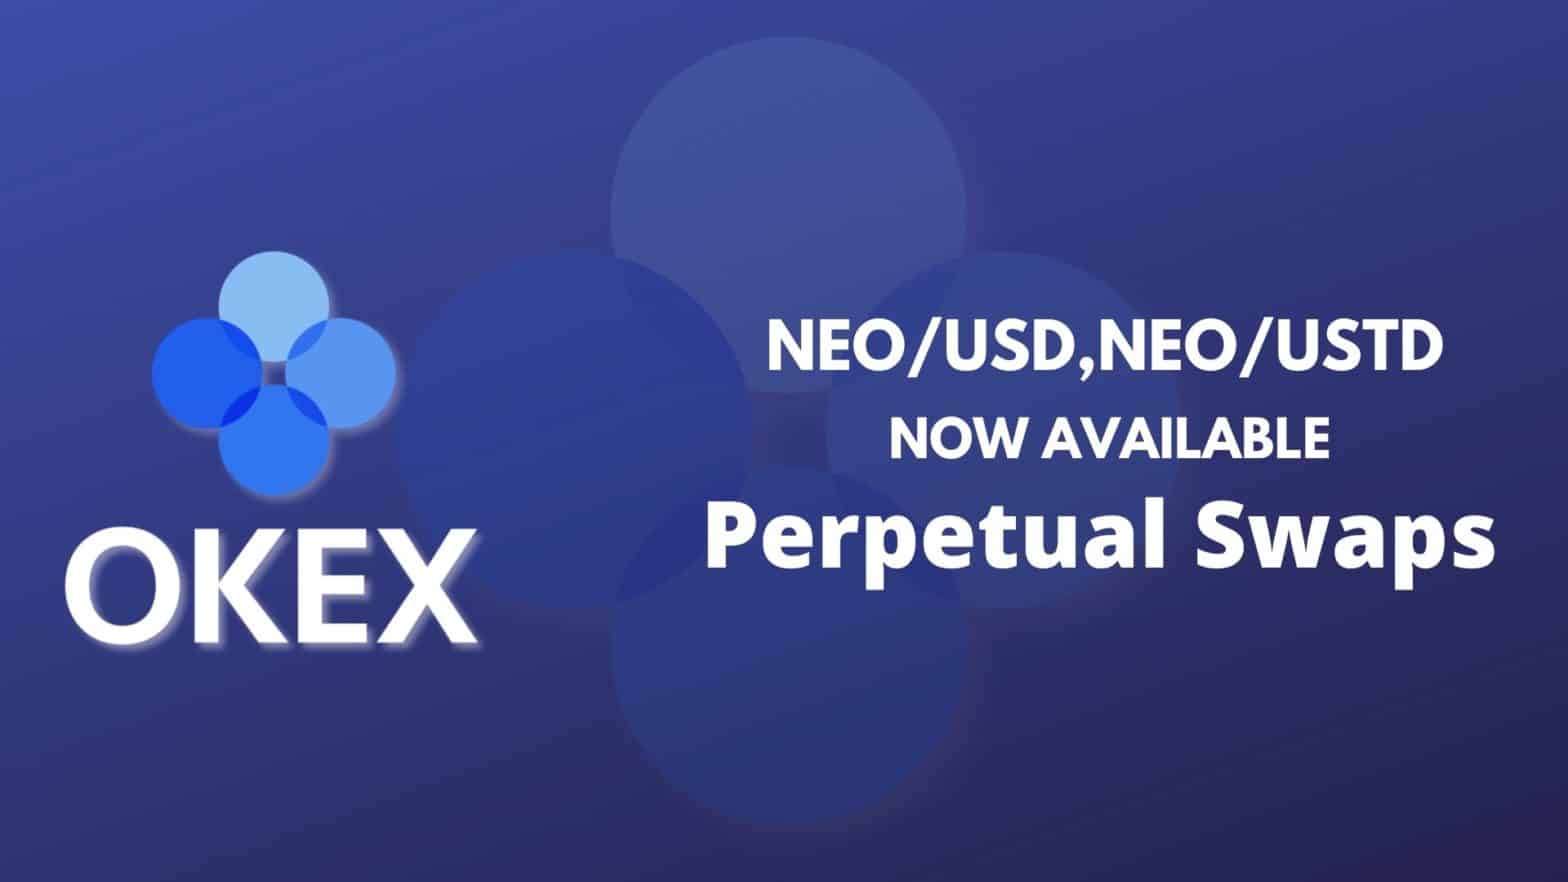 OKEx Has Launched Support for the Trading of Perpetual Swaps